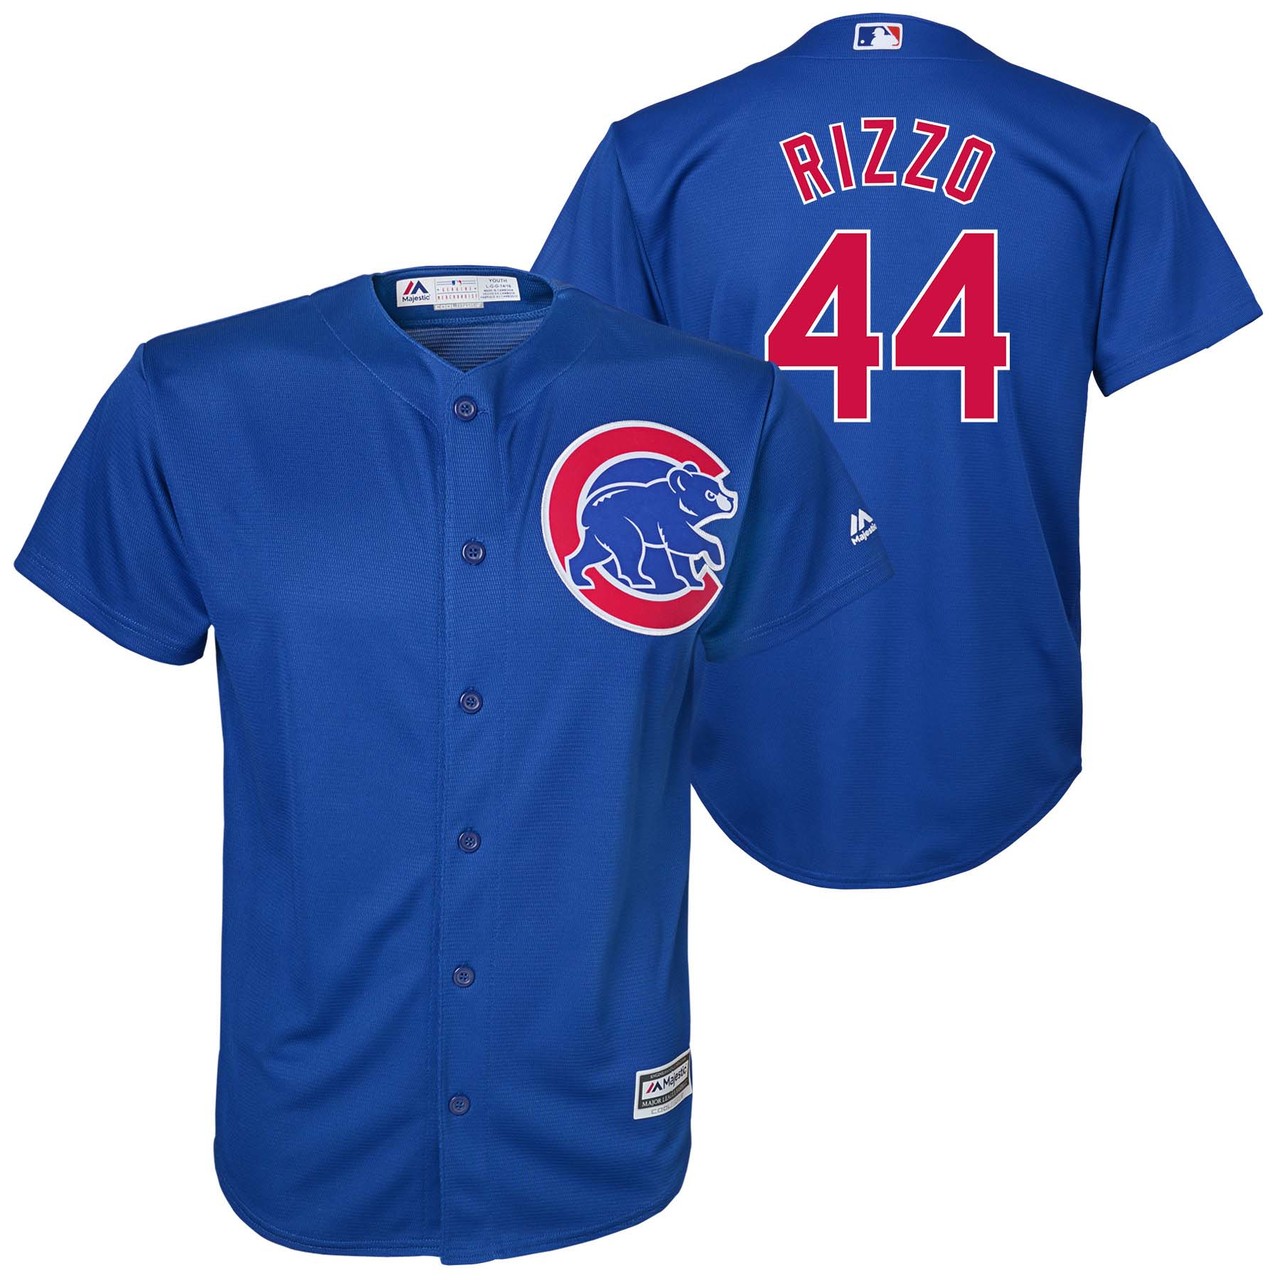 rizzo cubs jersey